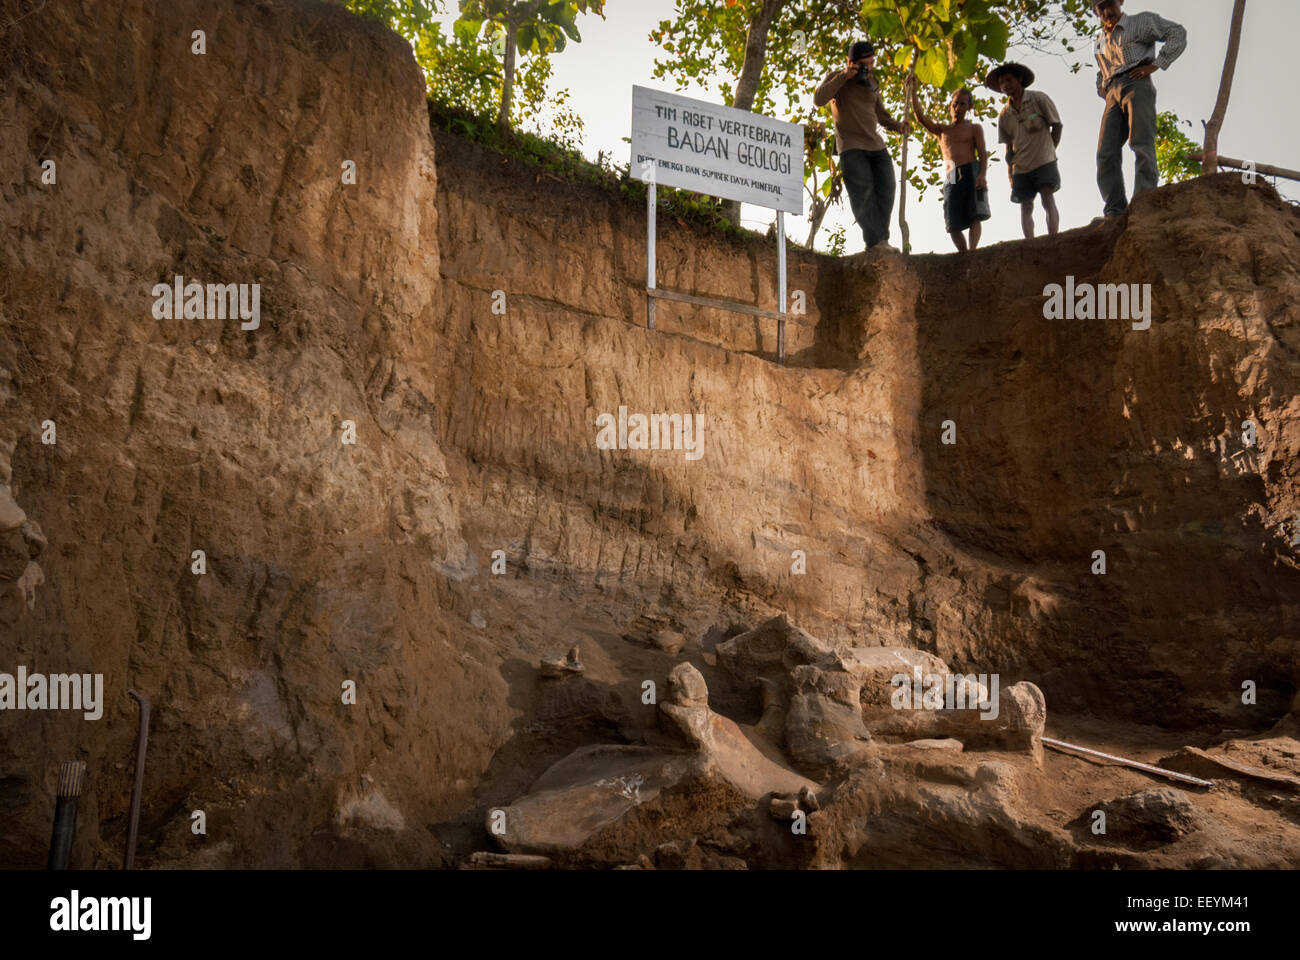 Excavation site of Elephas hysudrindicus ancient elephant fossils in Blora, Central Java. Stock Photo